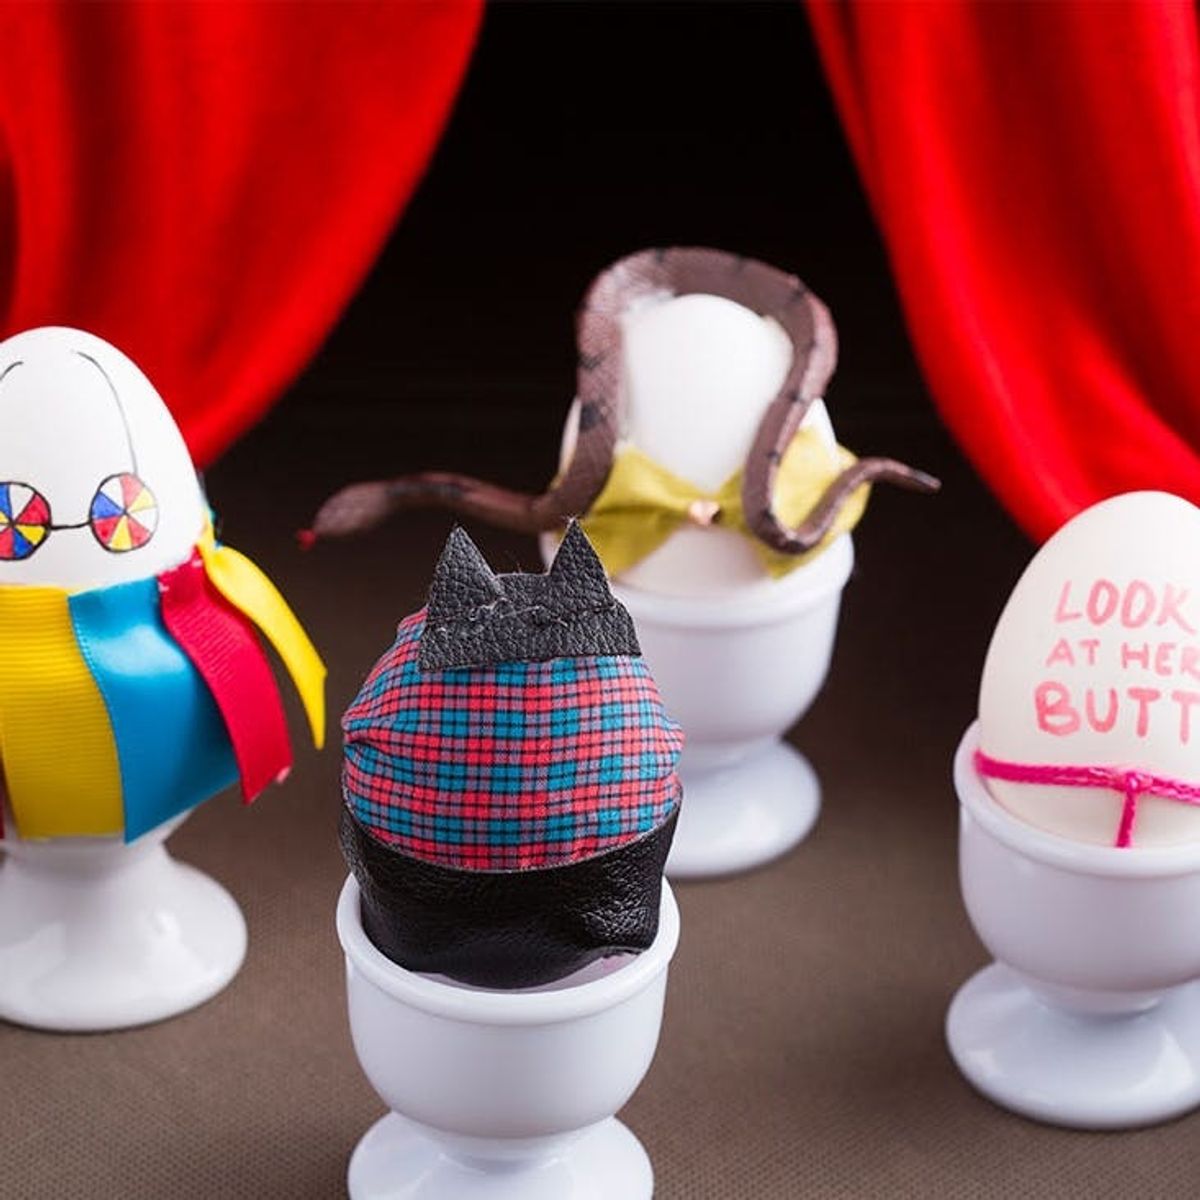 Can You Guess Which Pop Stars These Easter Eggs Are Dressed Up As?